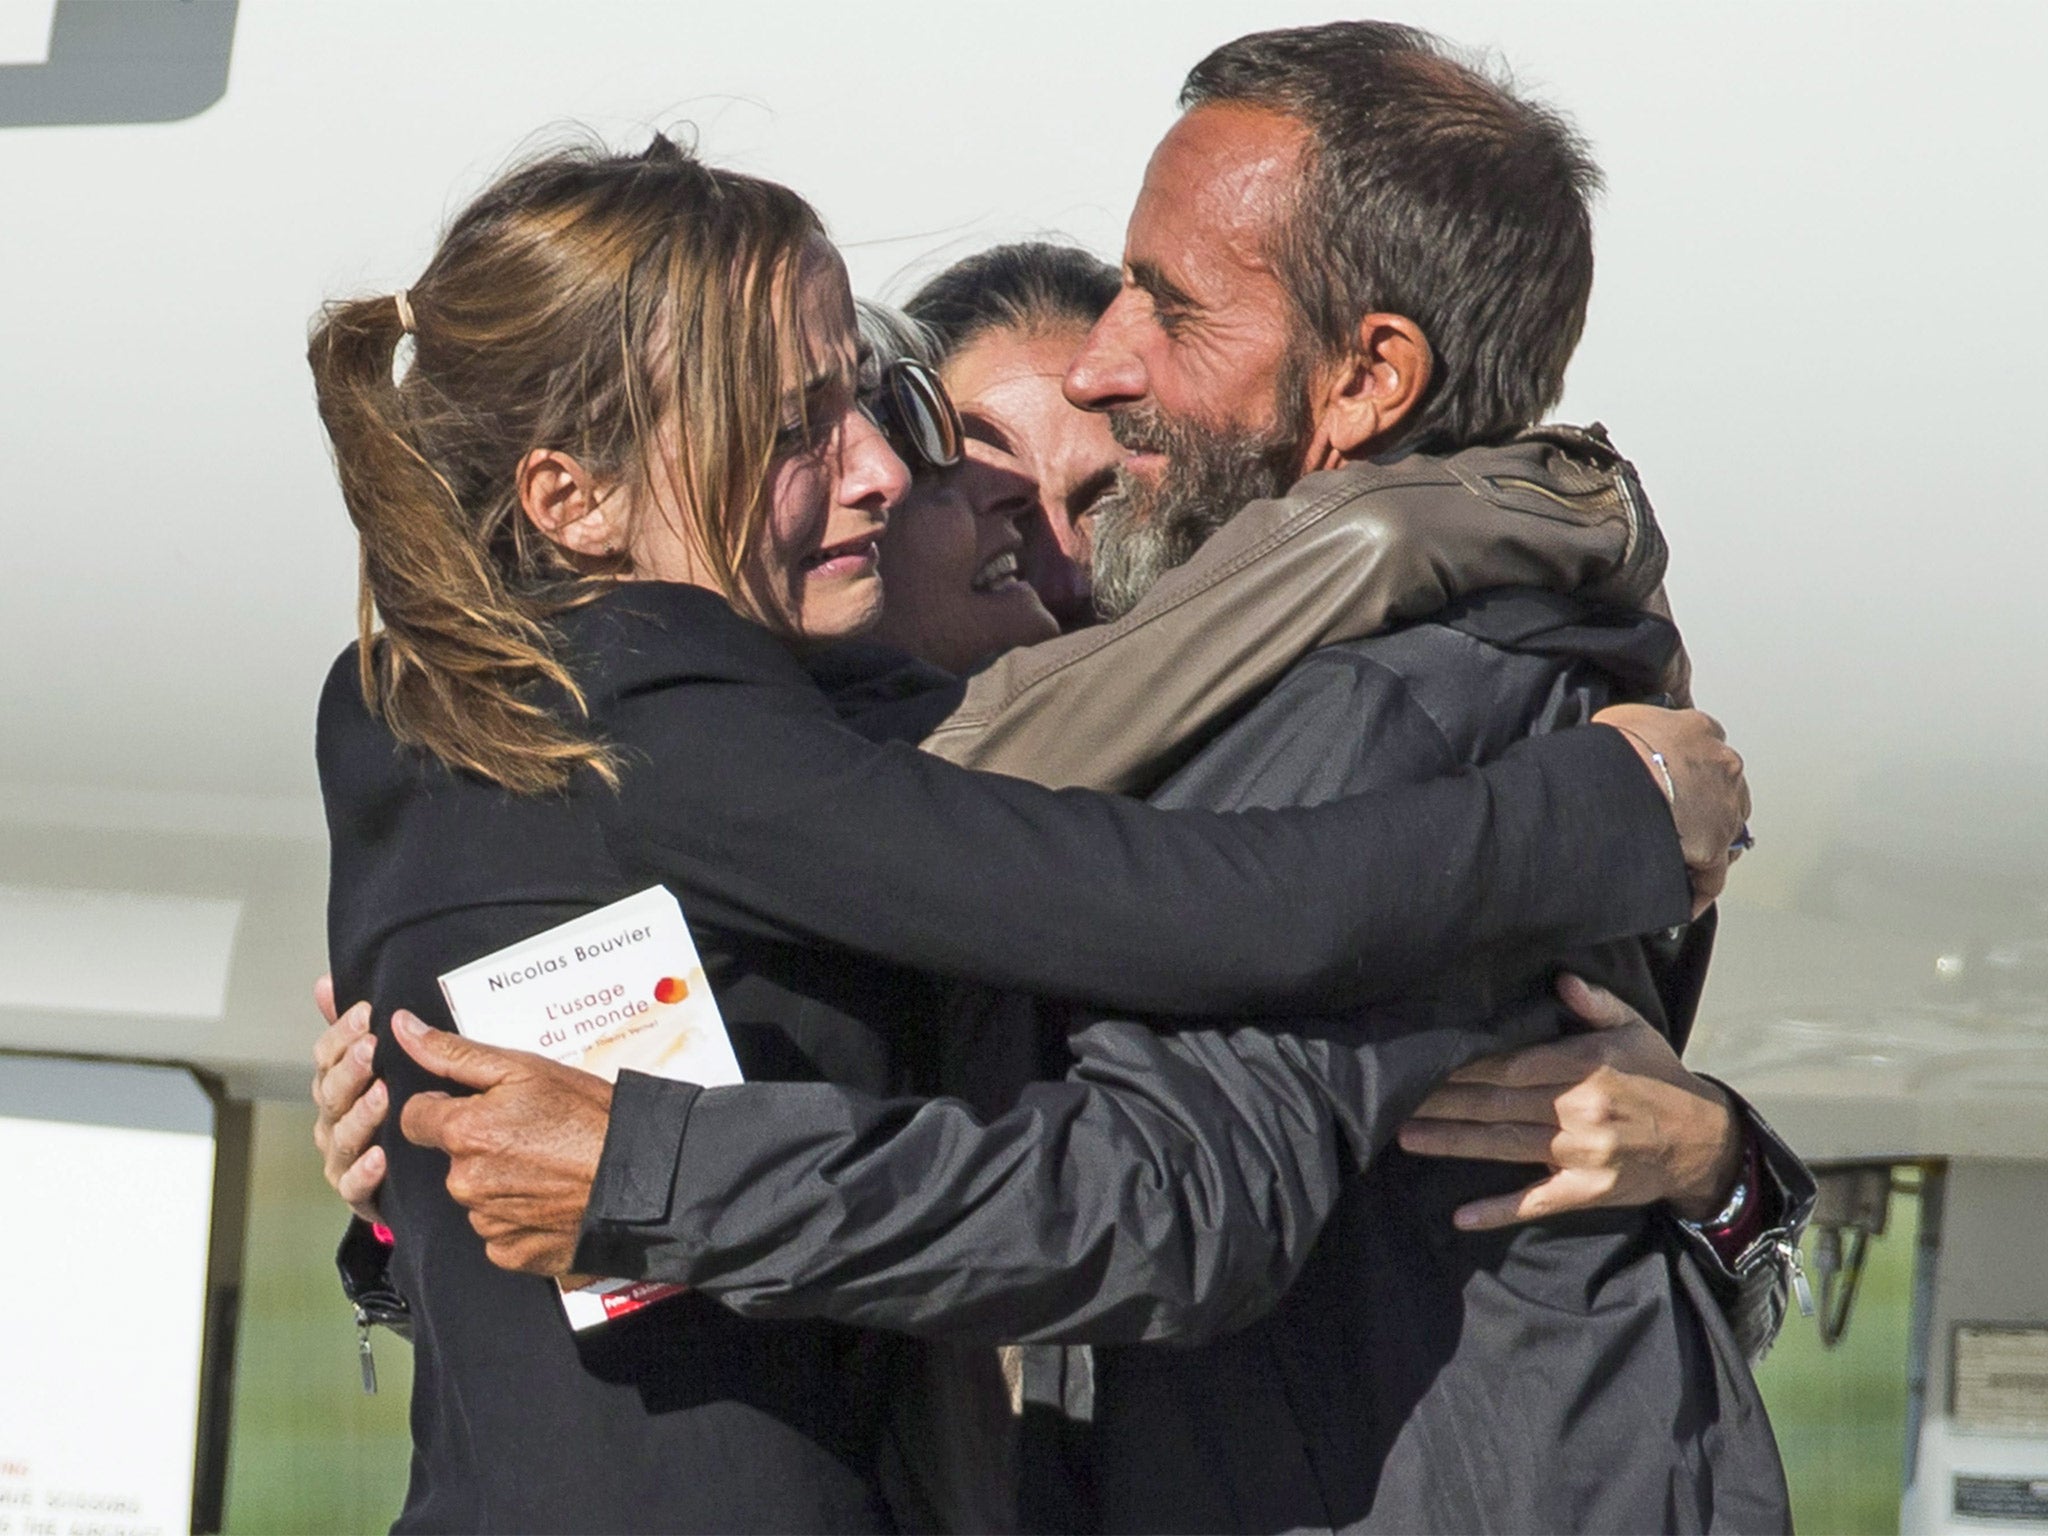 Family members greet the freed hostage Daniel Larribe as he arrives at a military airport near Paris